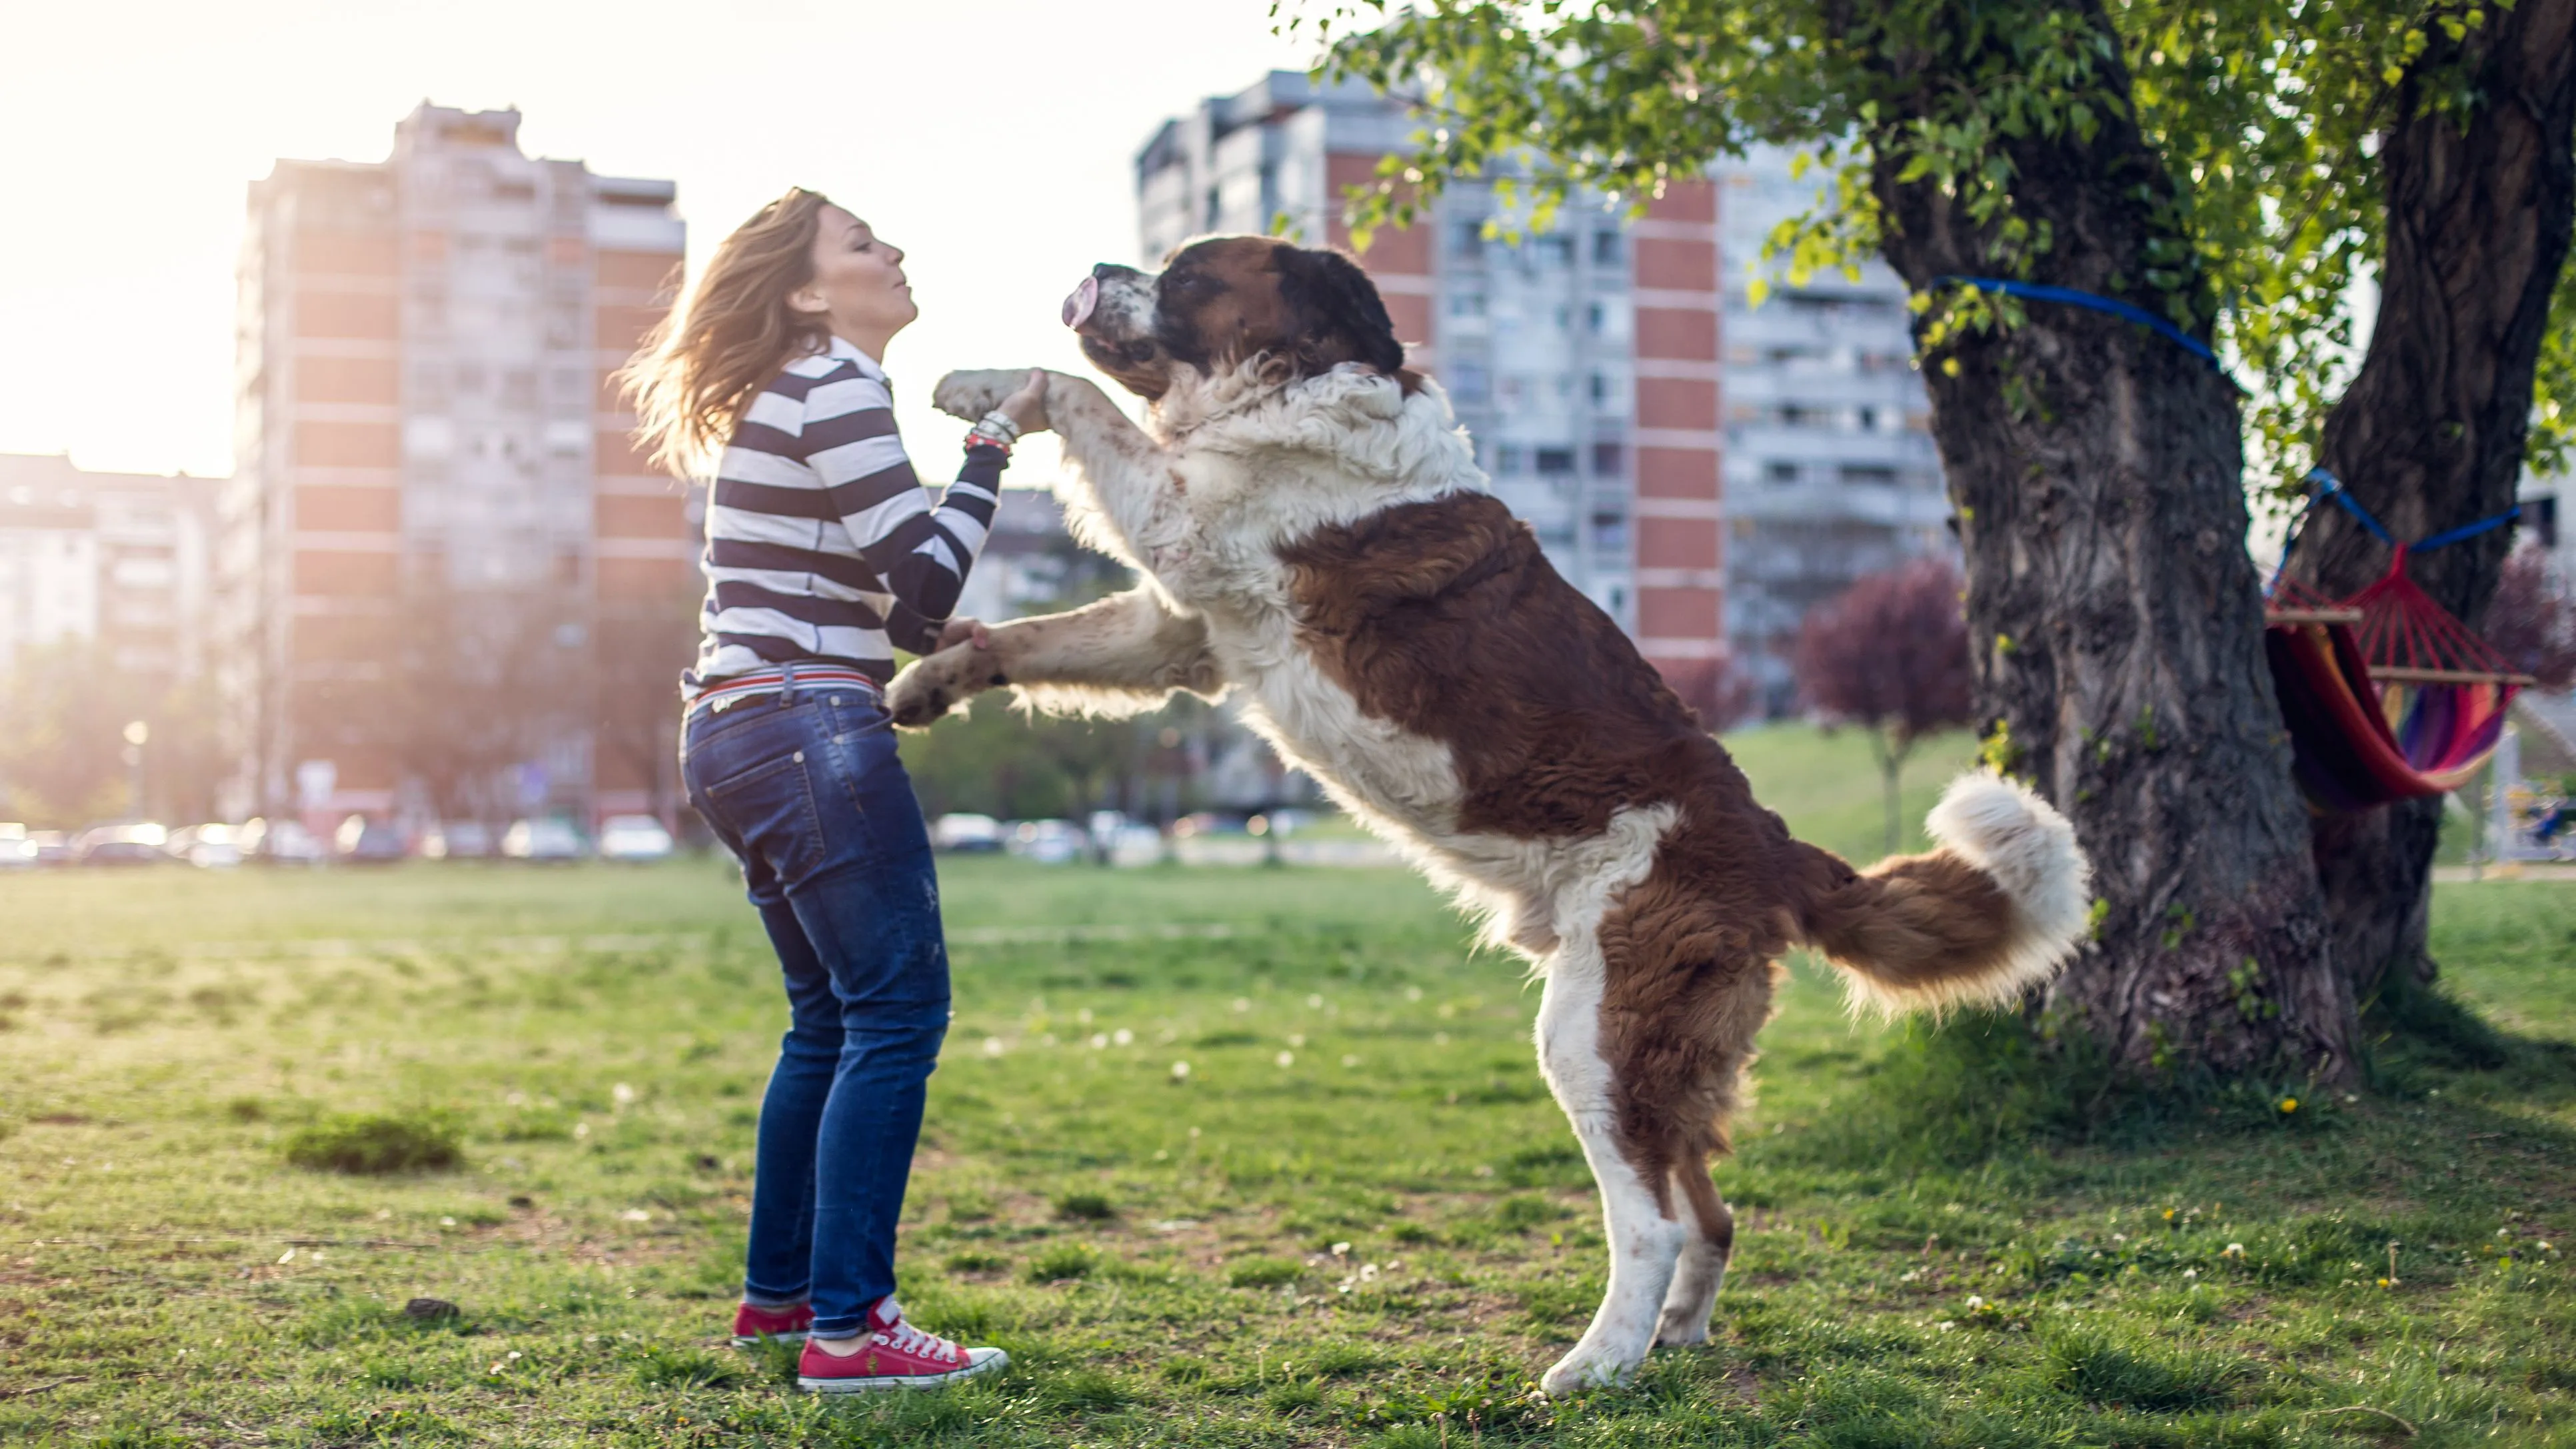 St. Bernard jumping up on a woman in a park in the sunshine